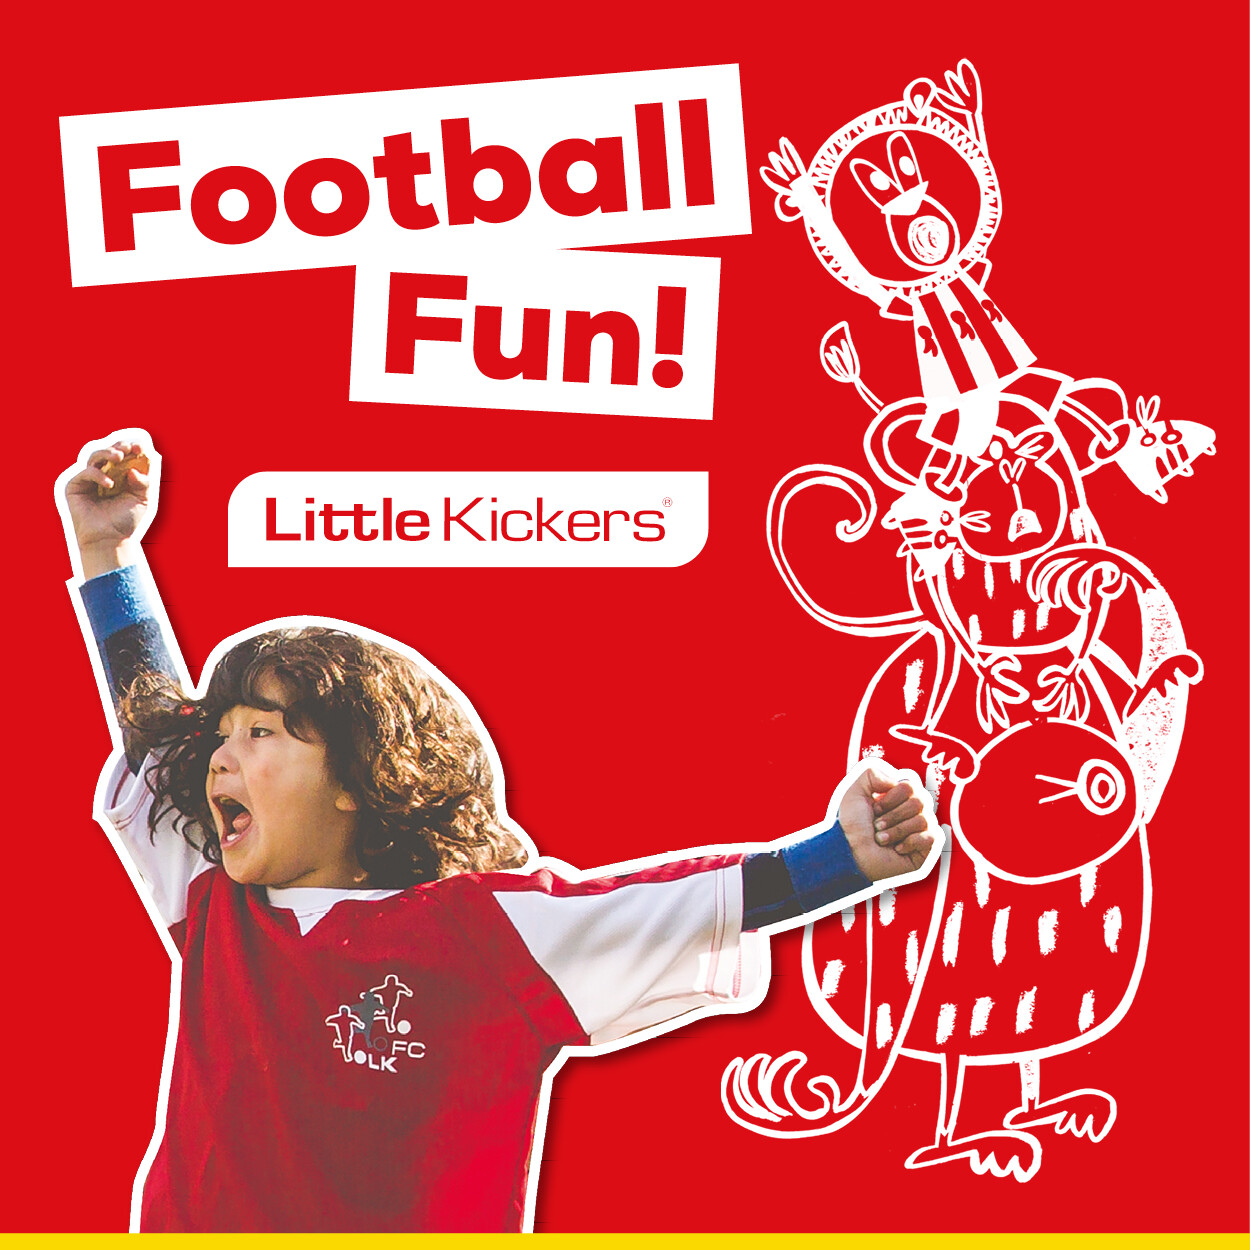 Little Kickers – Lifestyle Fitness 3G Outside Pitch